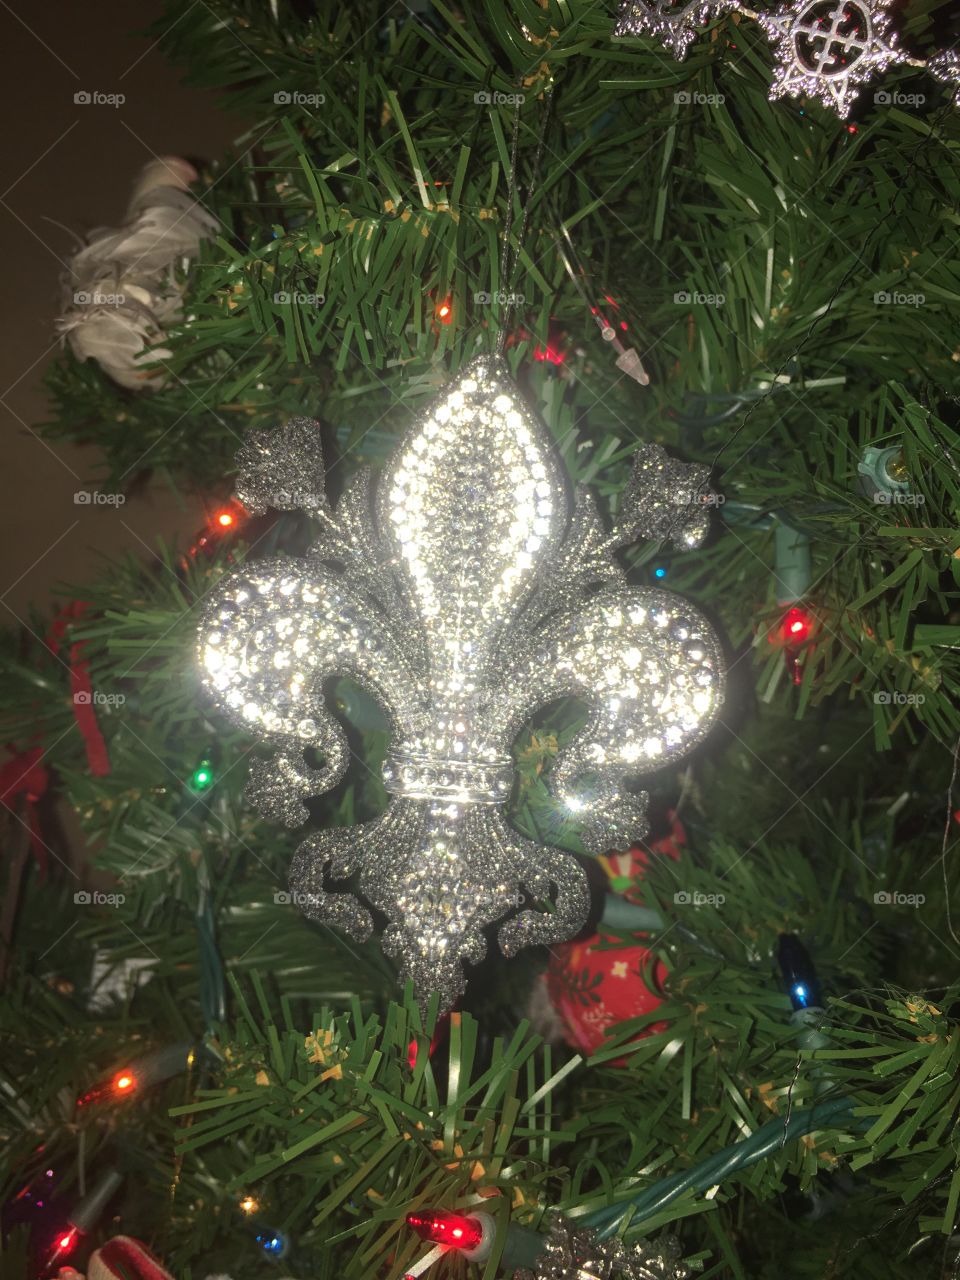 Sparkly ornament